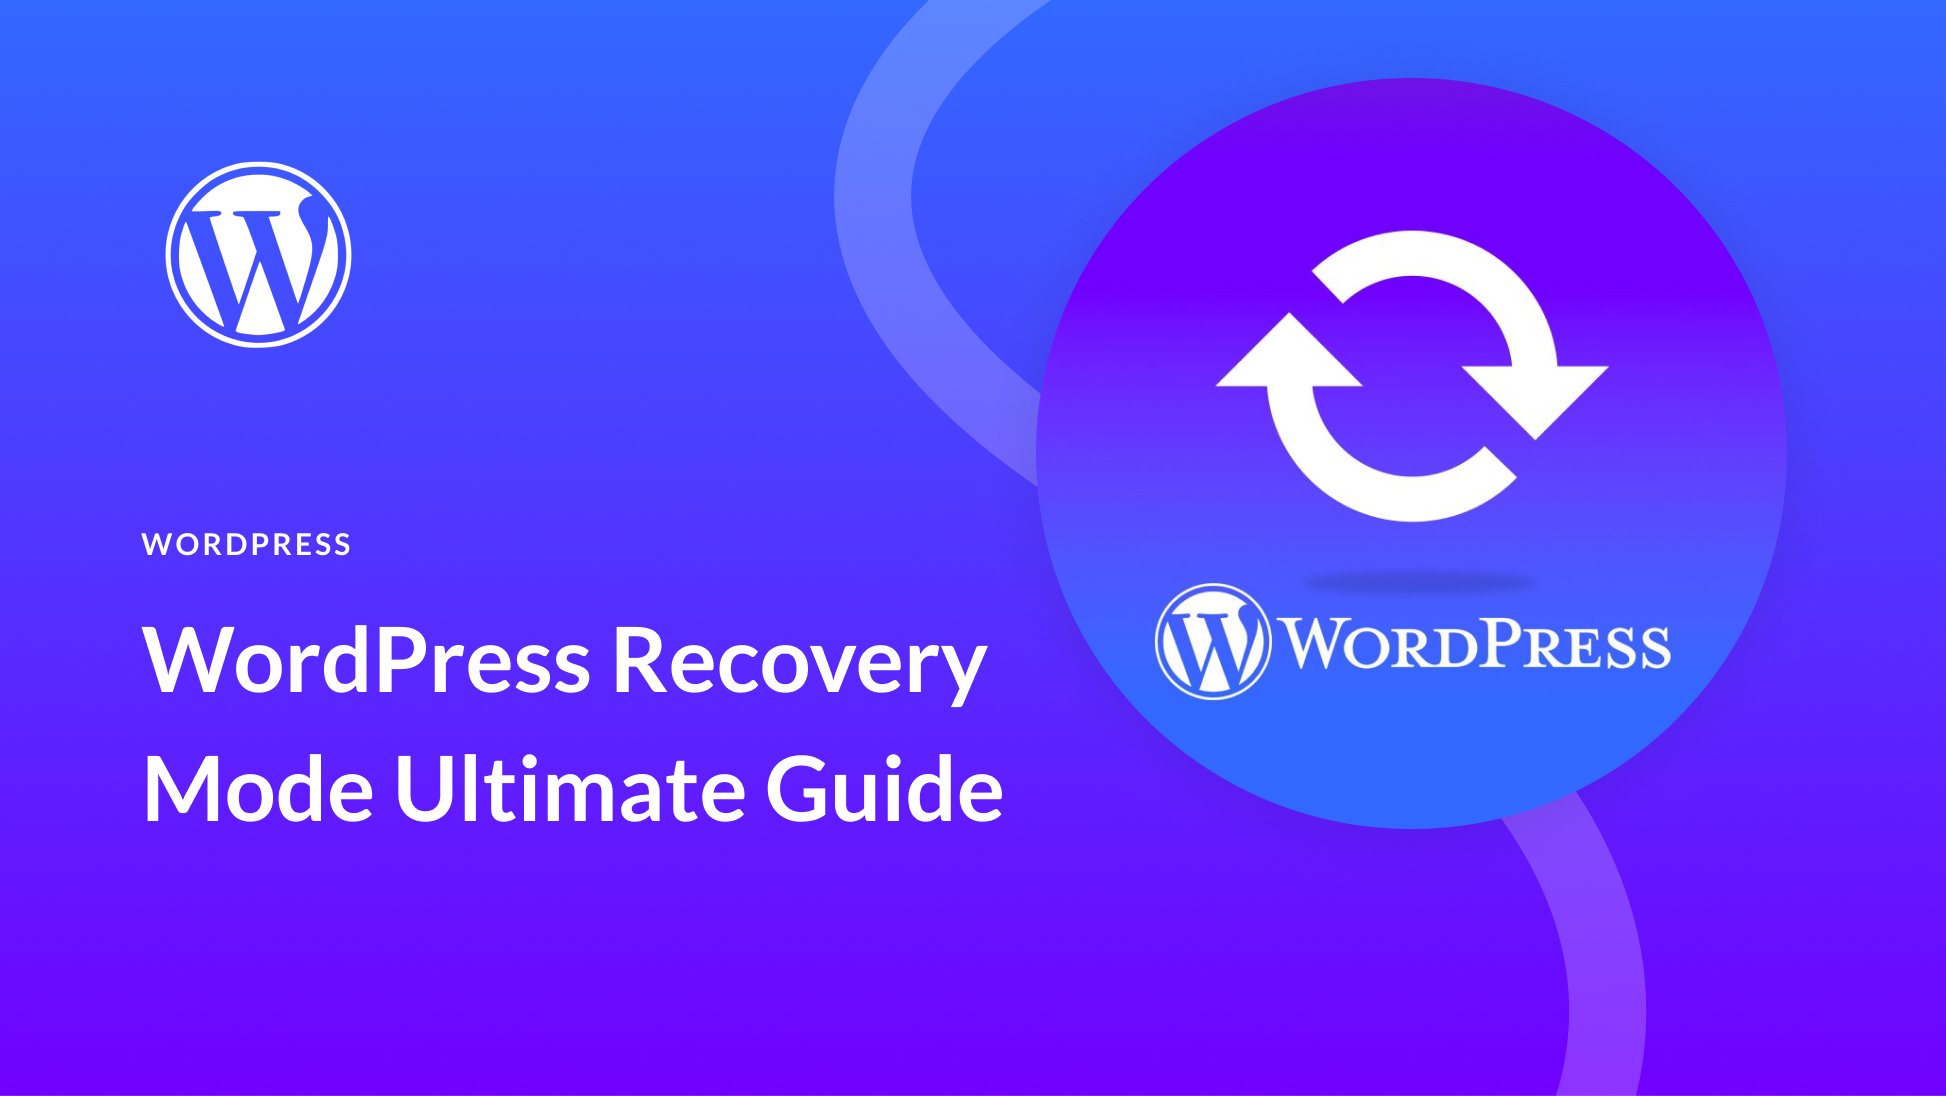 The Ultimate Guide to WordPress Recovery Mode